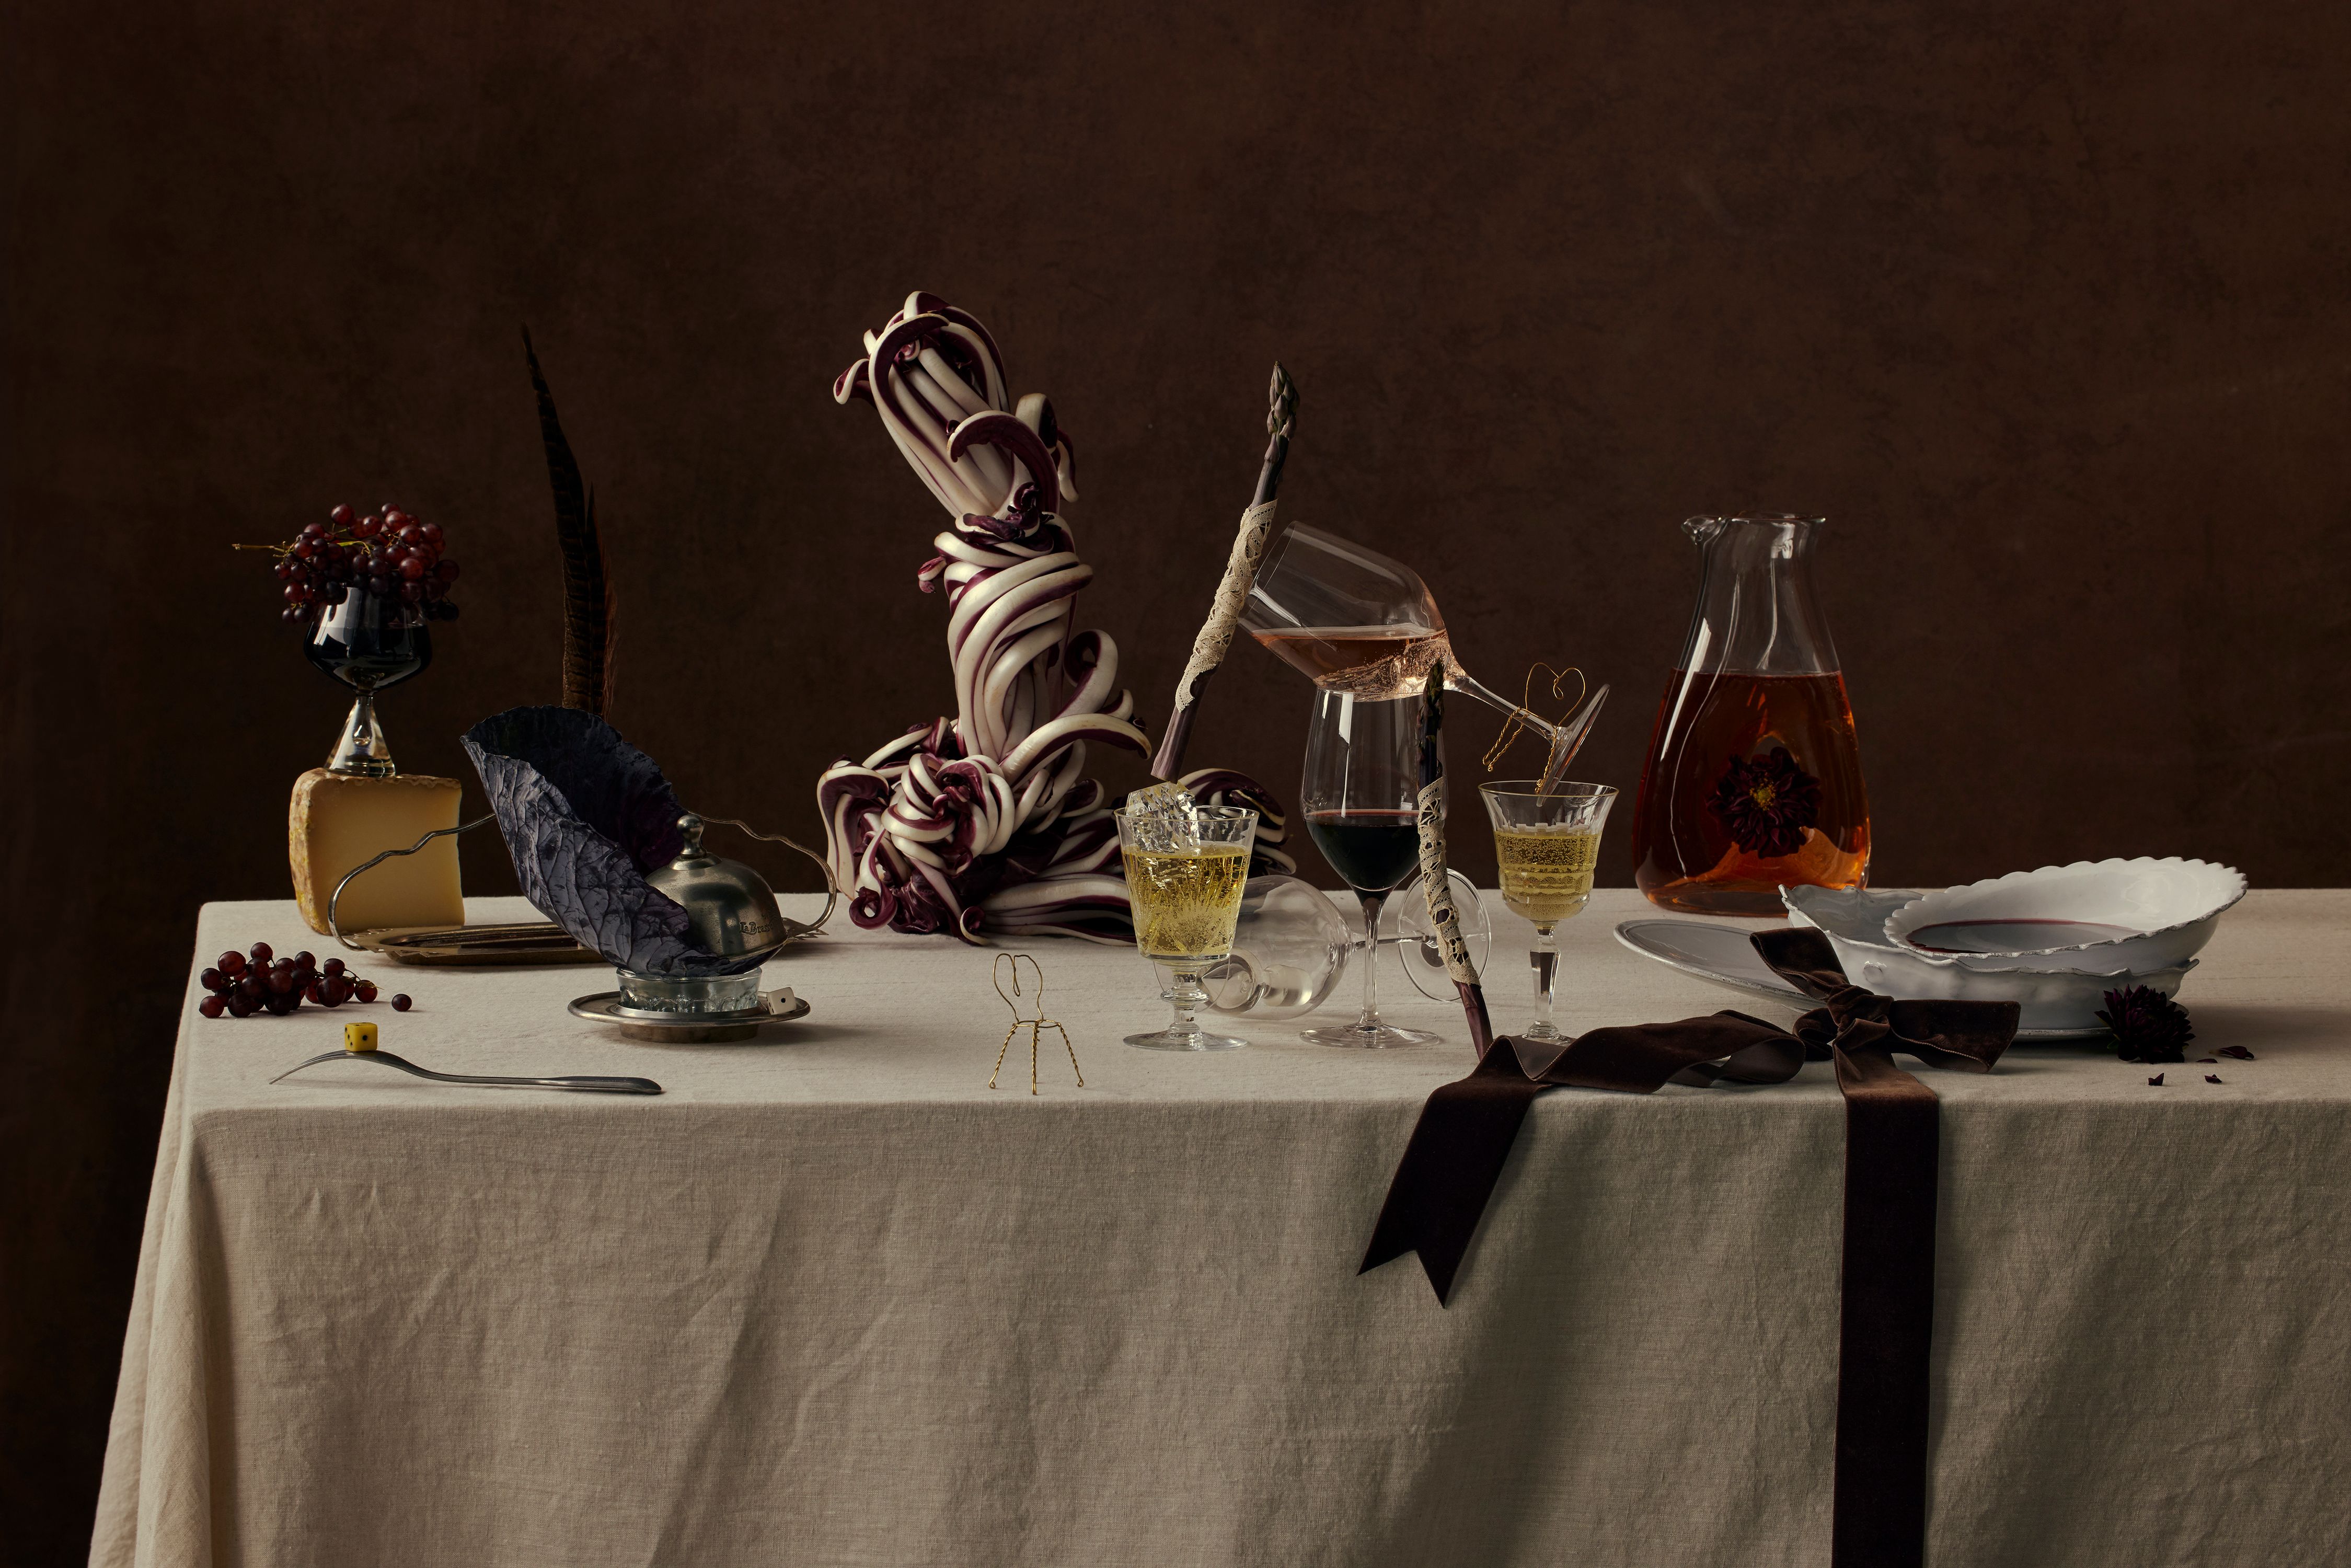 A fine dining table full of various wine related items, such as grapes, wine glasses and decanters